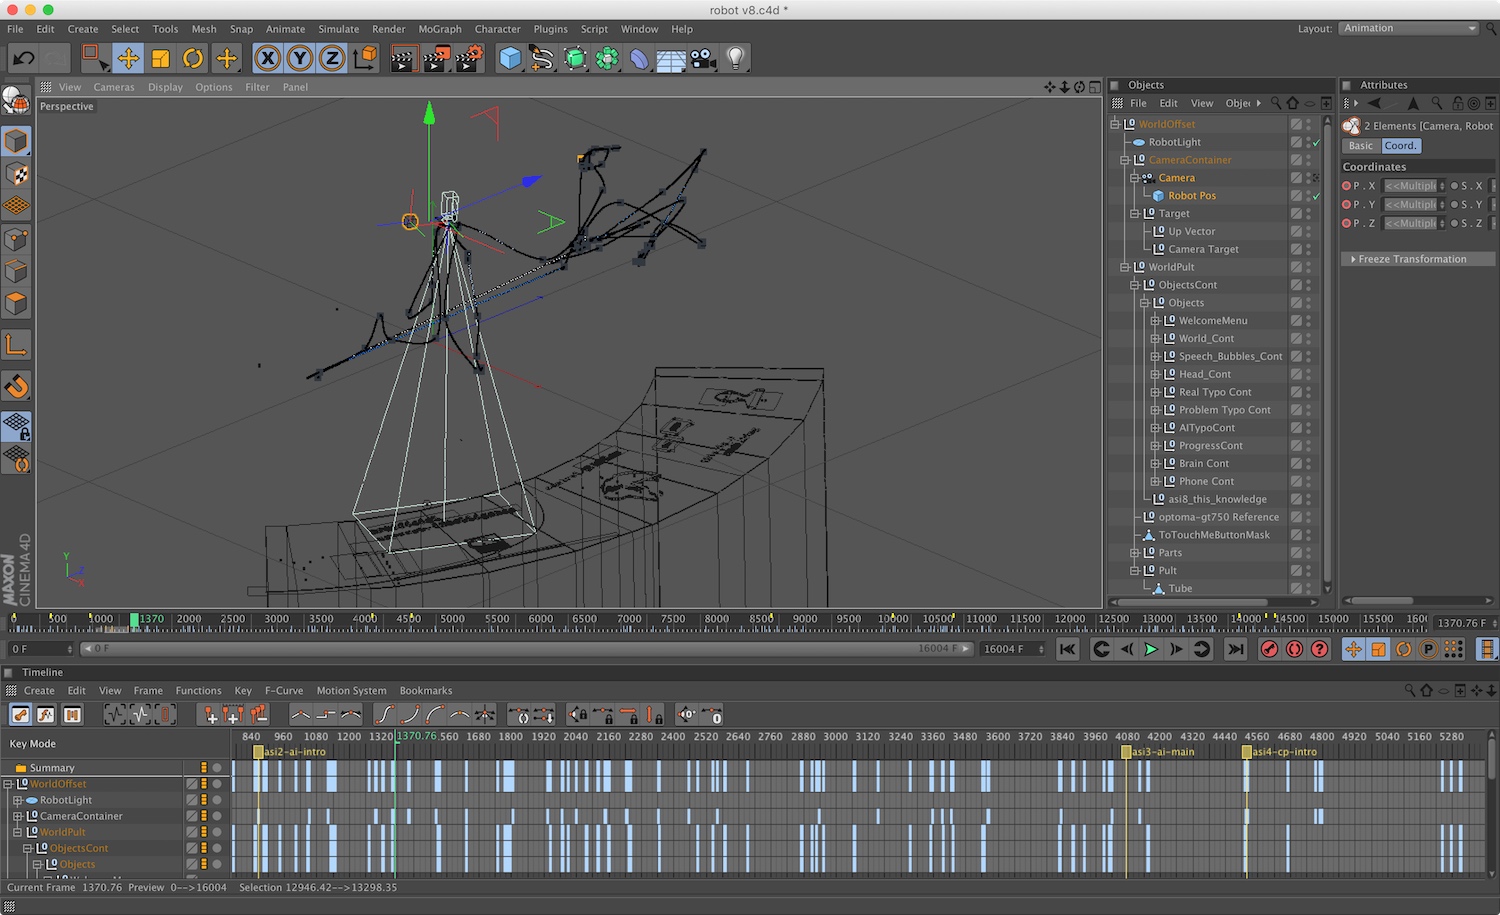 Cinema 4D Screenshot showing the animated path of the robot.